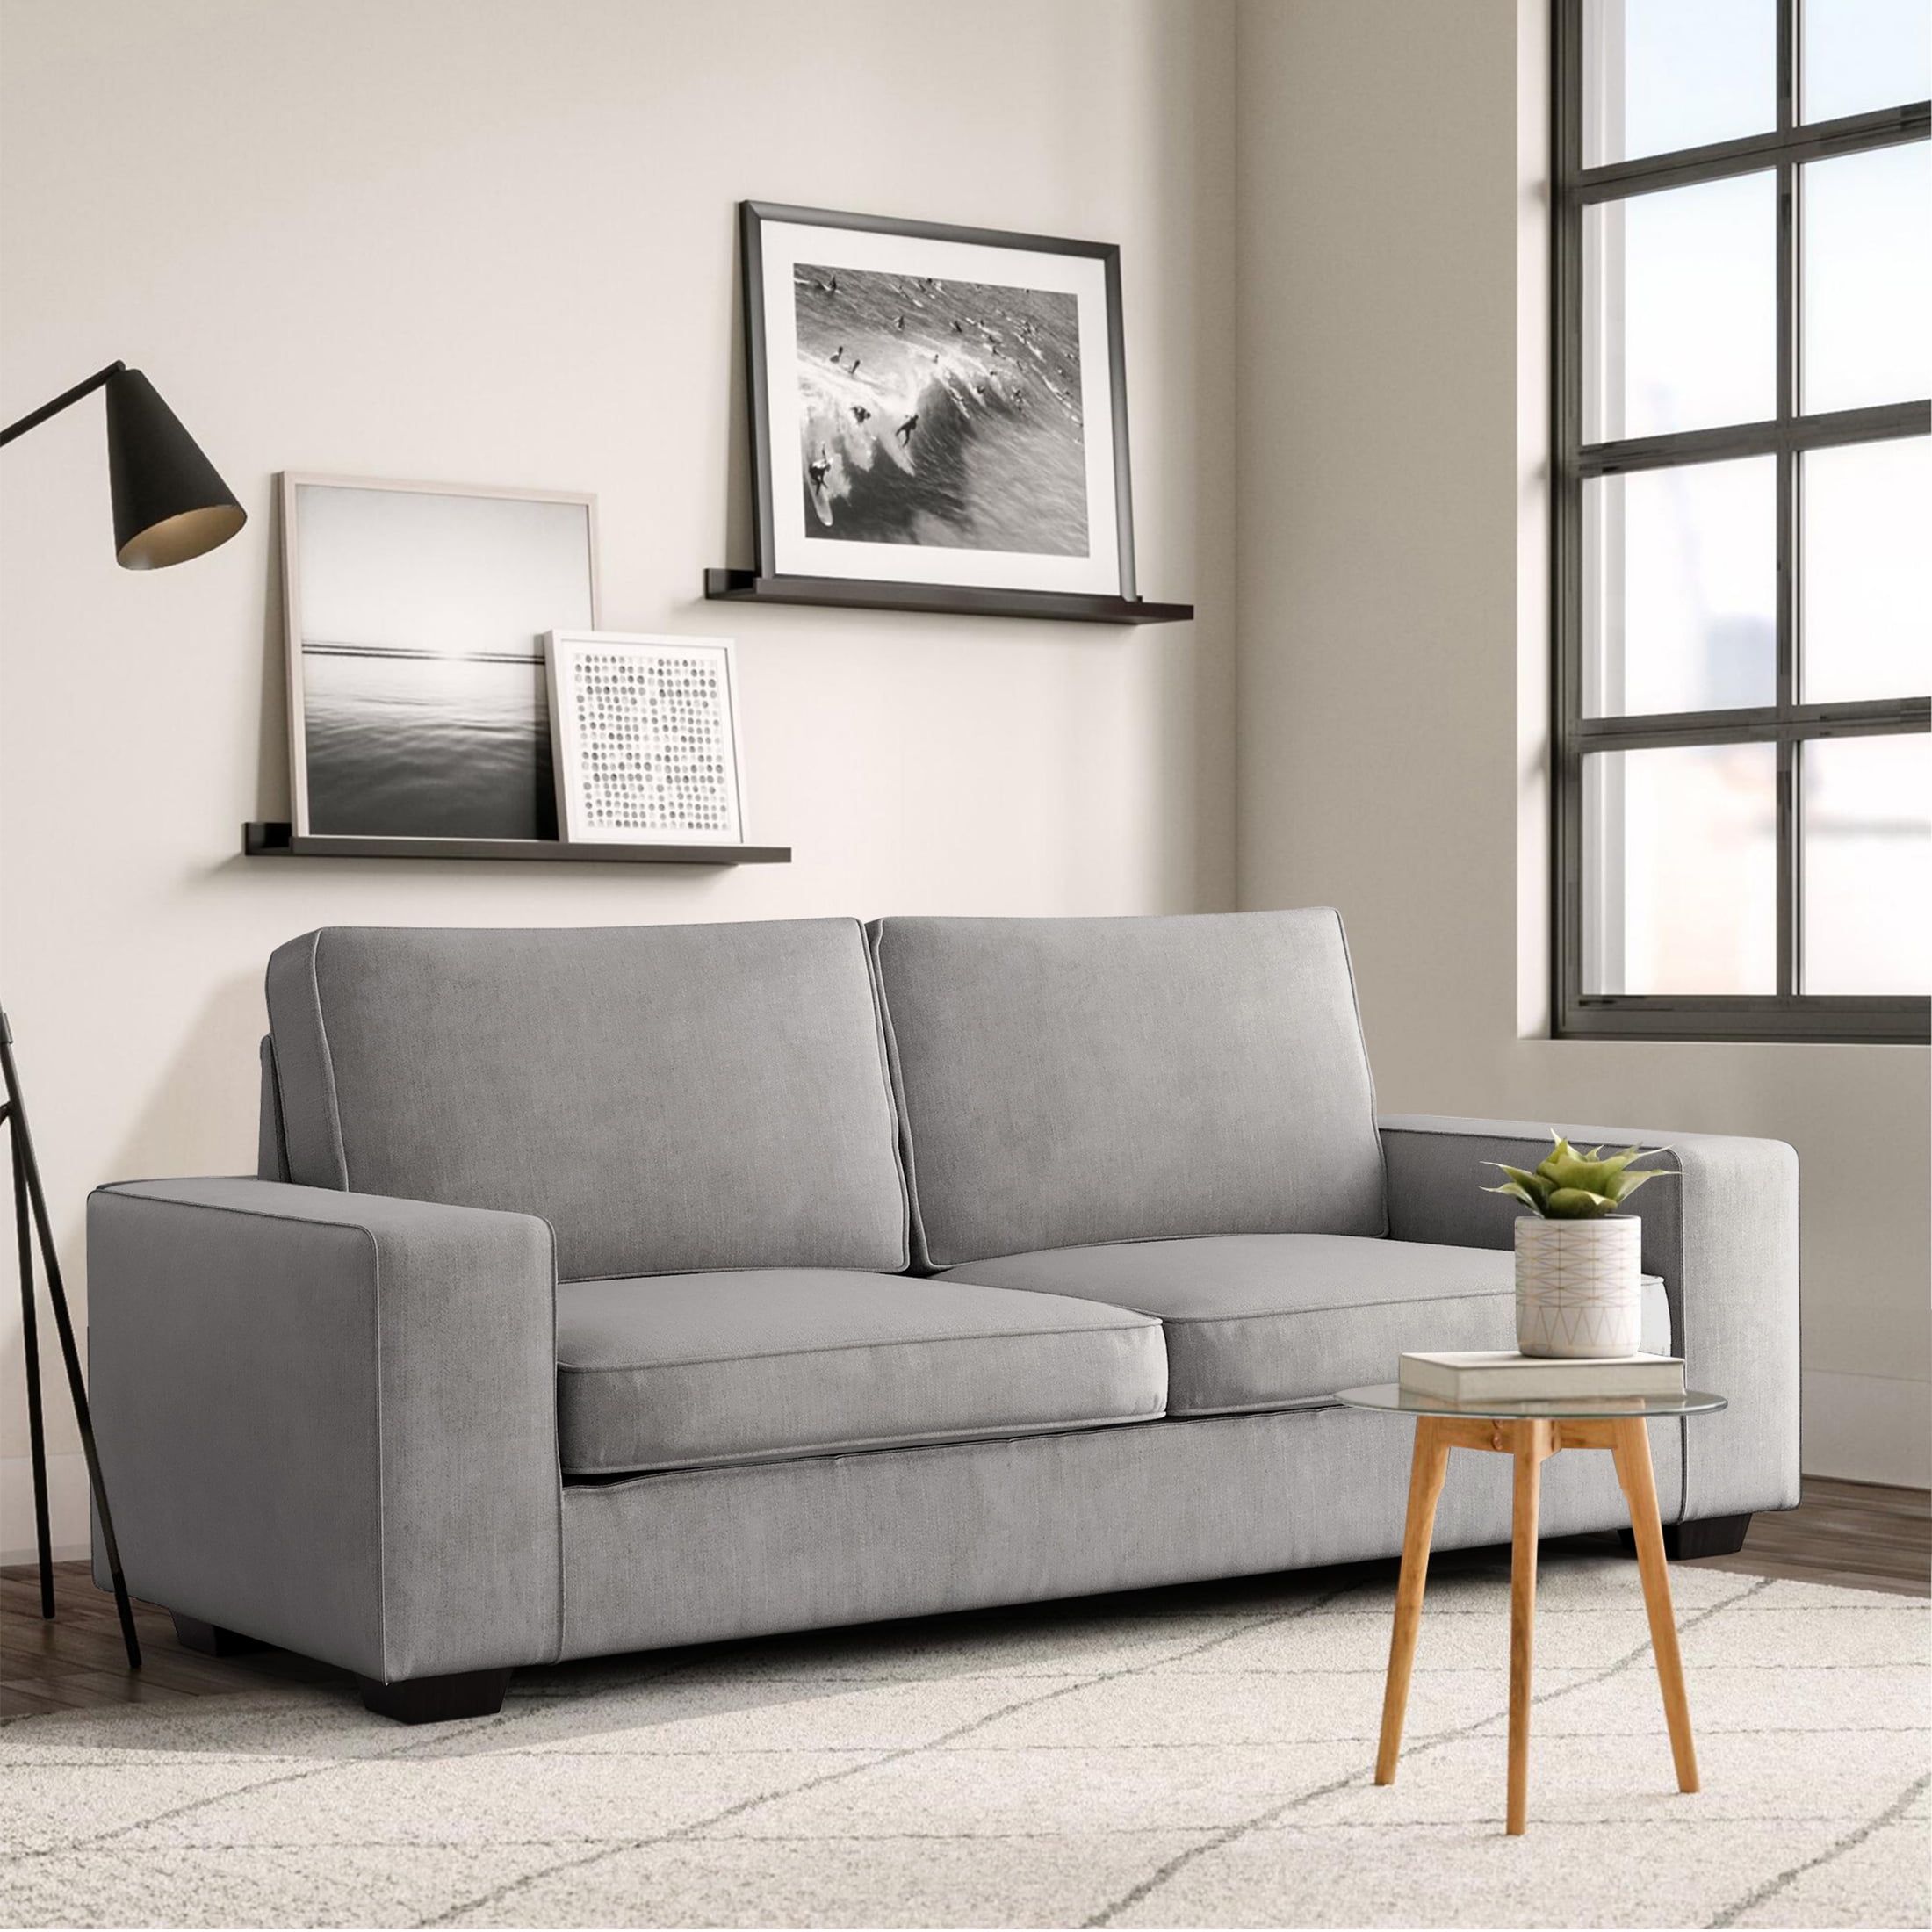 Ingalik 88.58" Modern Loveseat Sofa For Living Room, Chenille Sofa And Couch  With Square Armrests, Removable Sofa Cushions And Detachable Sofa Cover,  Easy To Install, 3 Seater, Light Grey – Walmart Inside Modern Light Grey Loveseat Sofas (Photo 1 of 15)